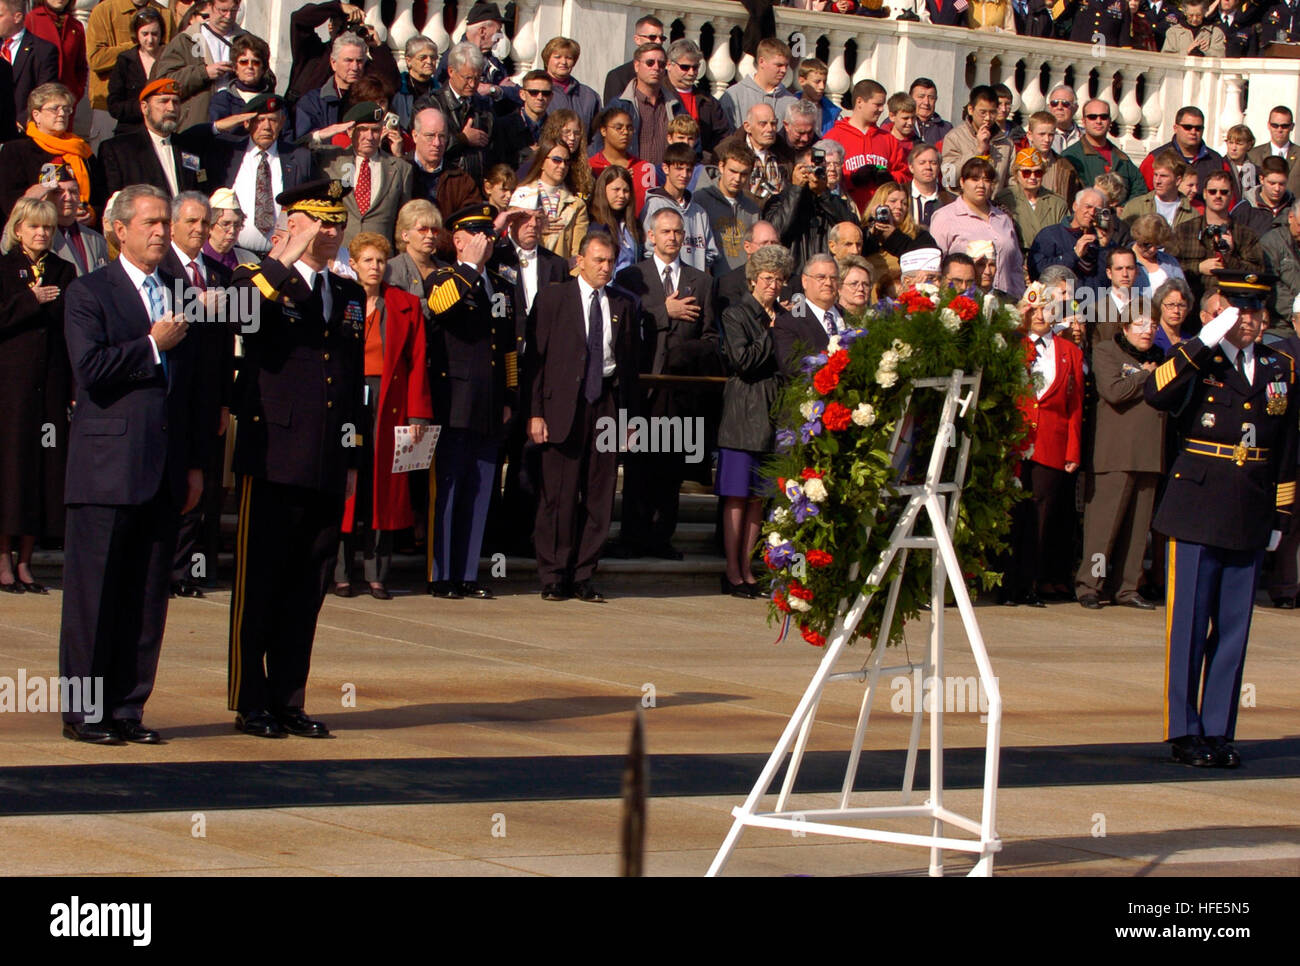 041111-G-3024G-800 Arlington National Cemetery, Va. (Nov. 11, 2004) Ð President George W. Bush and Commanding General, Maj. Gen. Galen B. Jackman pay respects to the unknown servicemen laid to rest at the Tomb of the Unknowns in Arlington National Cemetery, Va., during a VeteranÕs Day ceremony. U.S. Coast Guard photo by Petty Officer 1st Class John Gaffney (RELEASED) US Navy 041111-G-3024G-800 President George W. Bush and Commanding General, Maj. Gen. Galen B. Jackman pay respects to the unknown servicemen laid to rest at the Tomb of the Unknowns Stock Photo